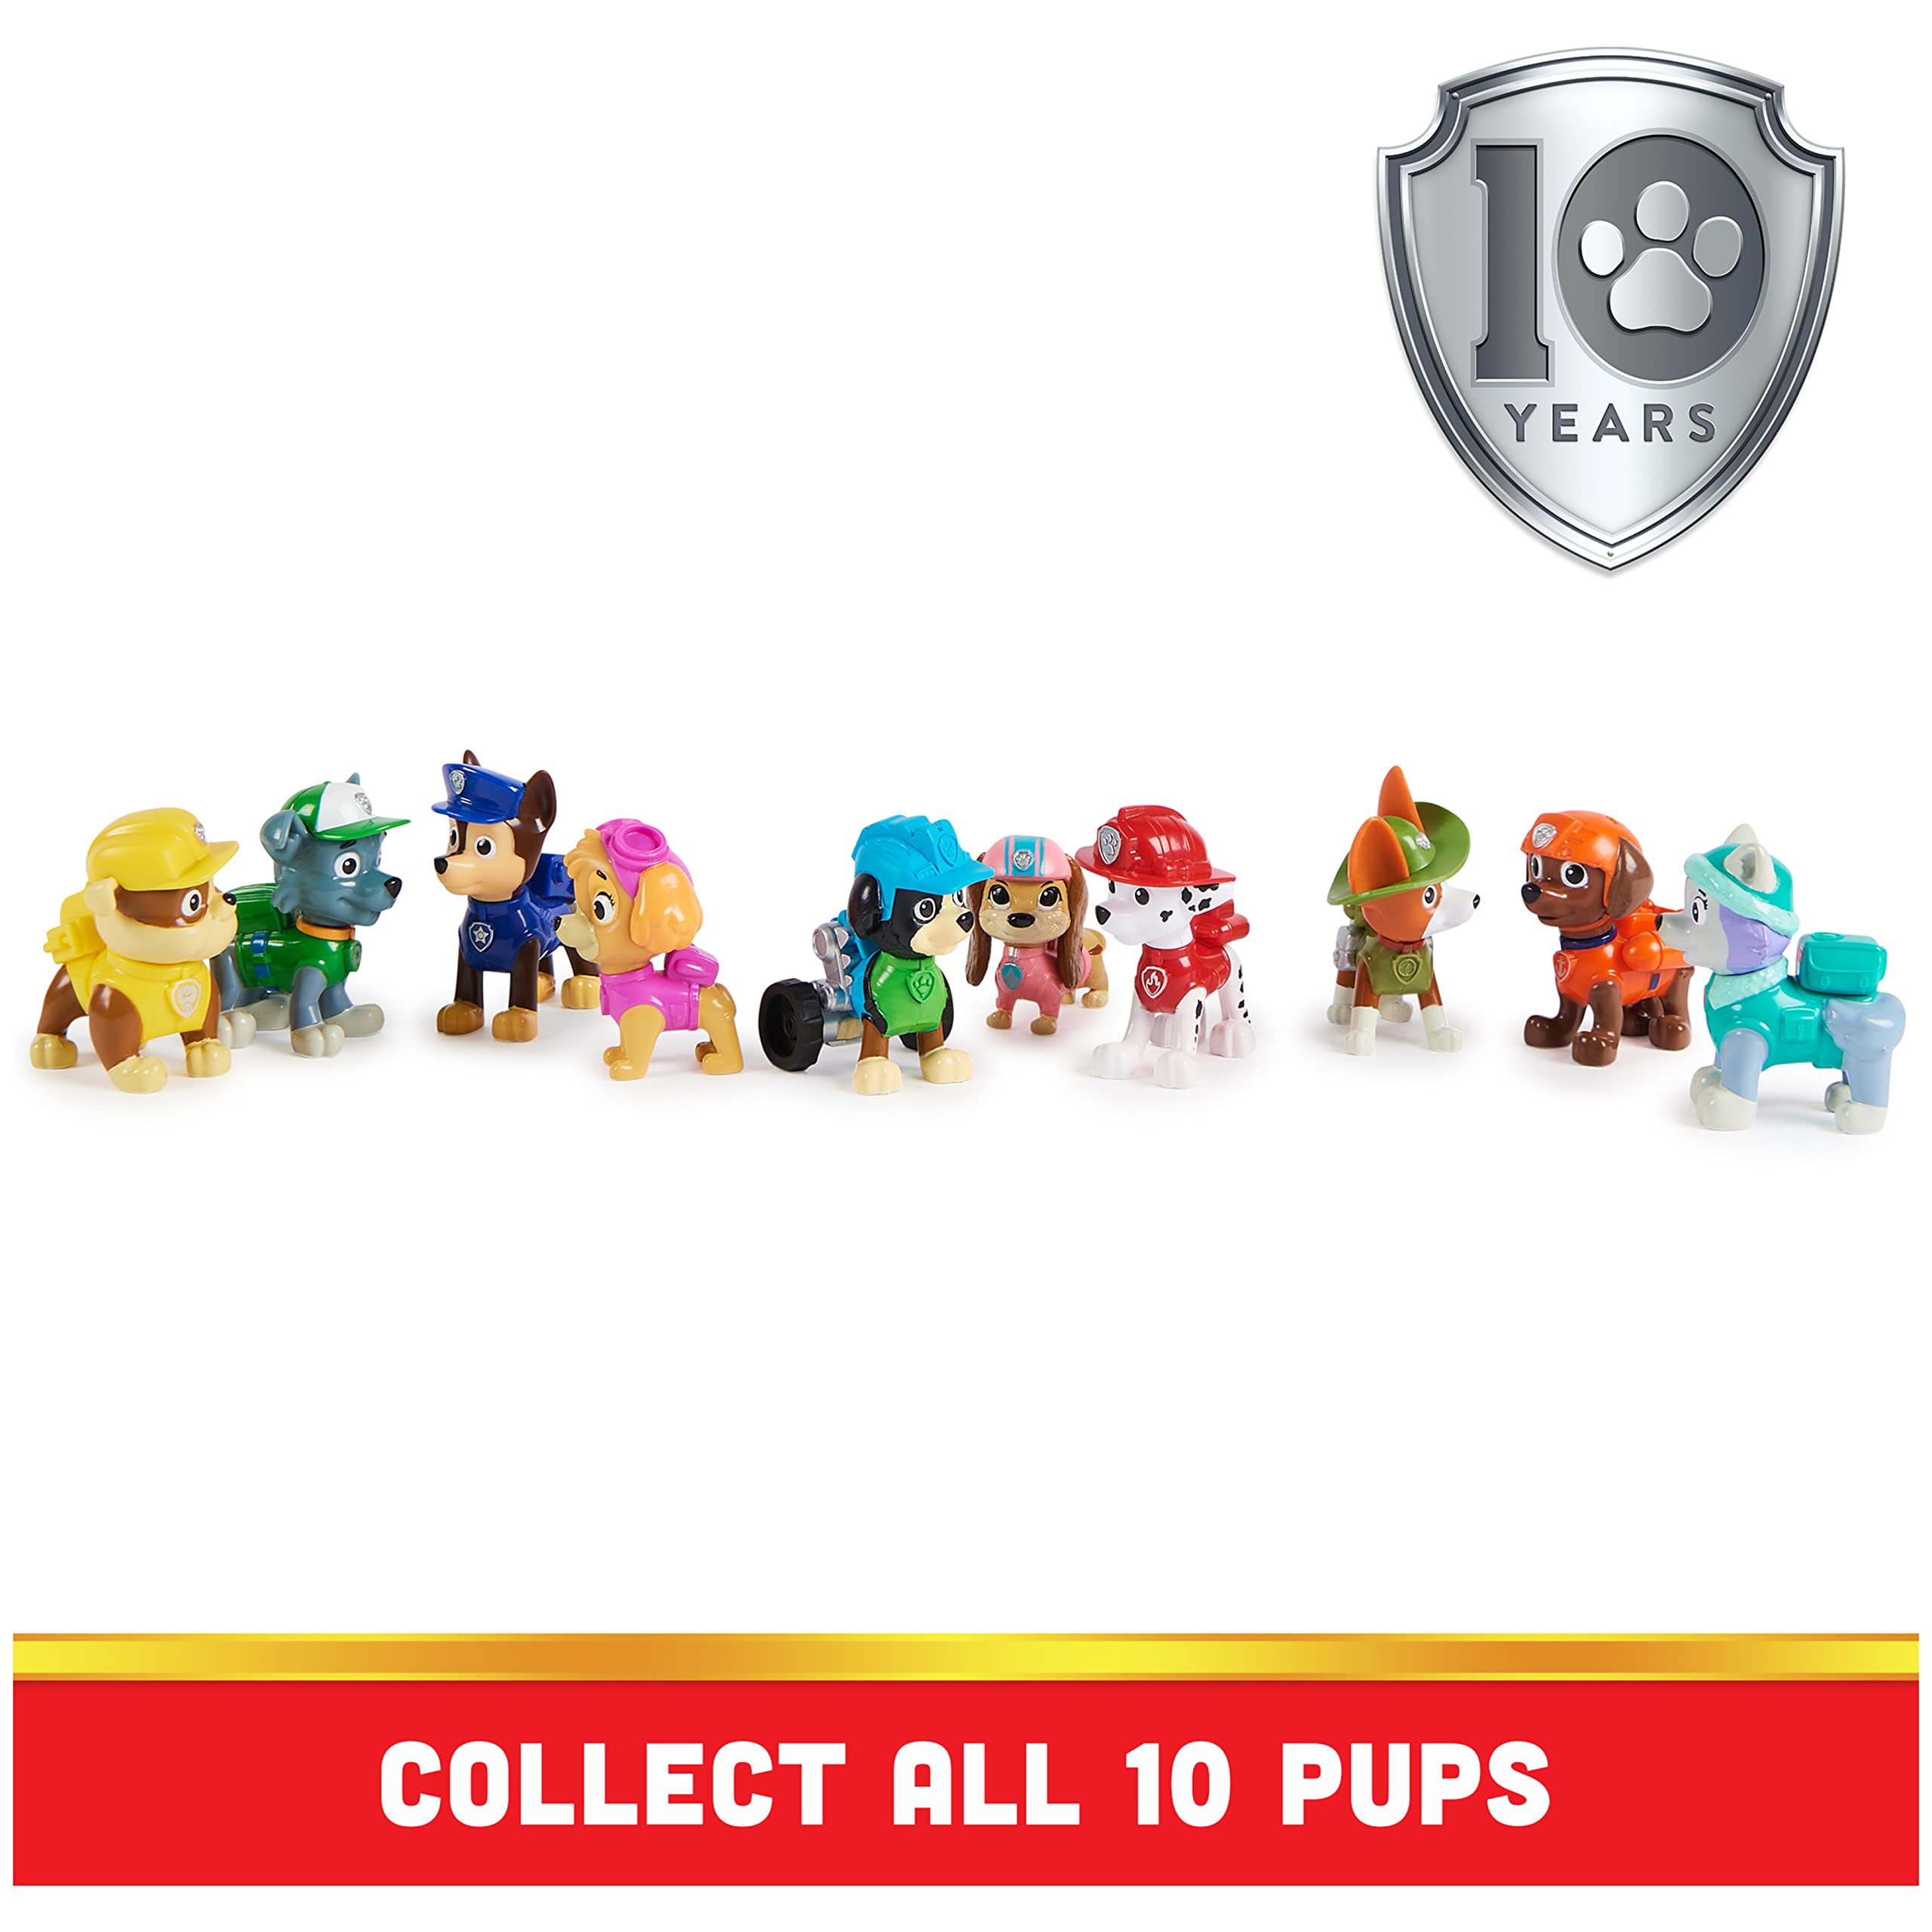 Paw Patrol, 10th Anniversary, All Paws On Deck Toy Figures Gift Pack with 10 Collectible Action Figures, Kids Toys for Ages 3 and up